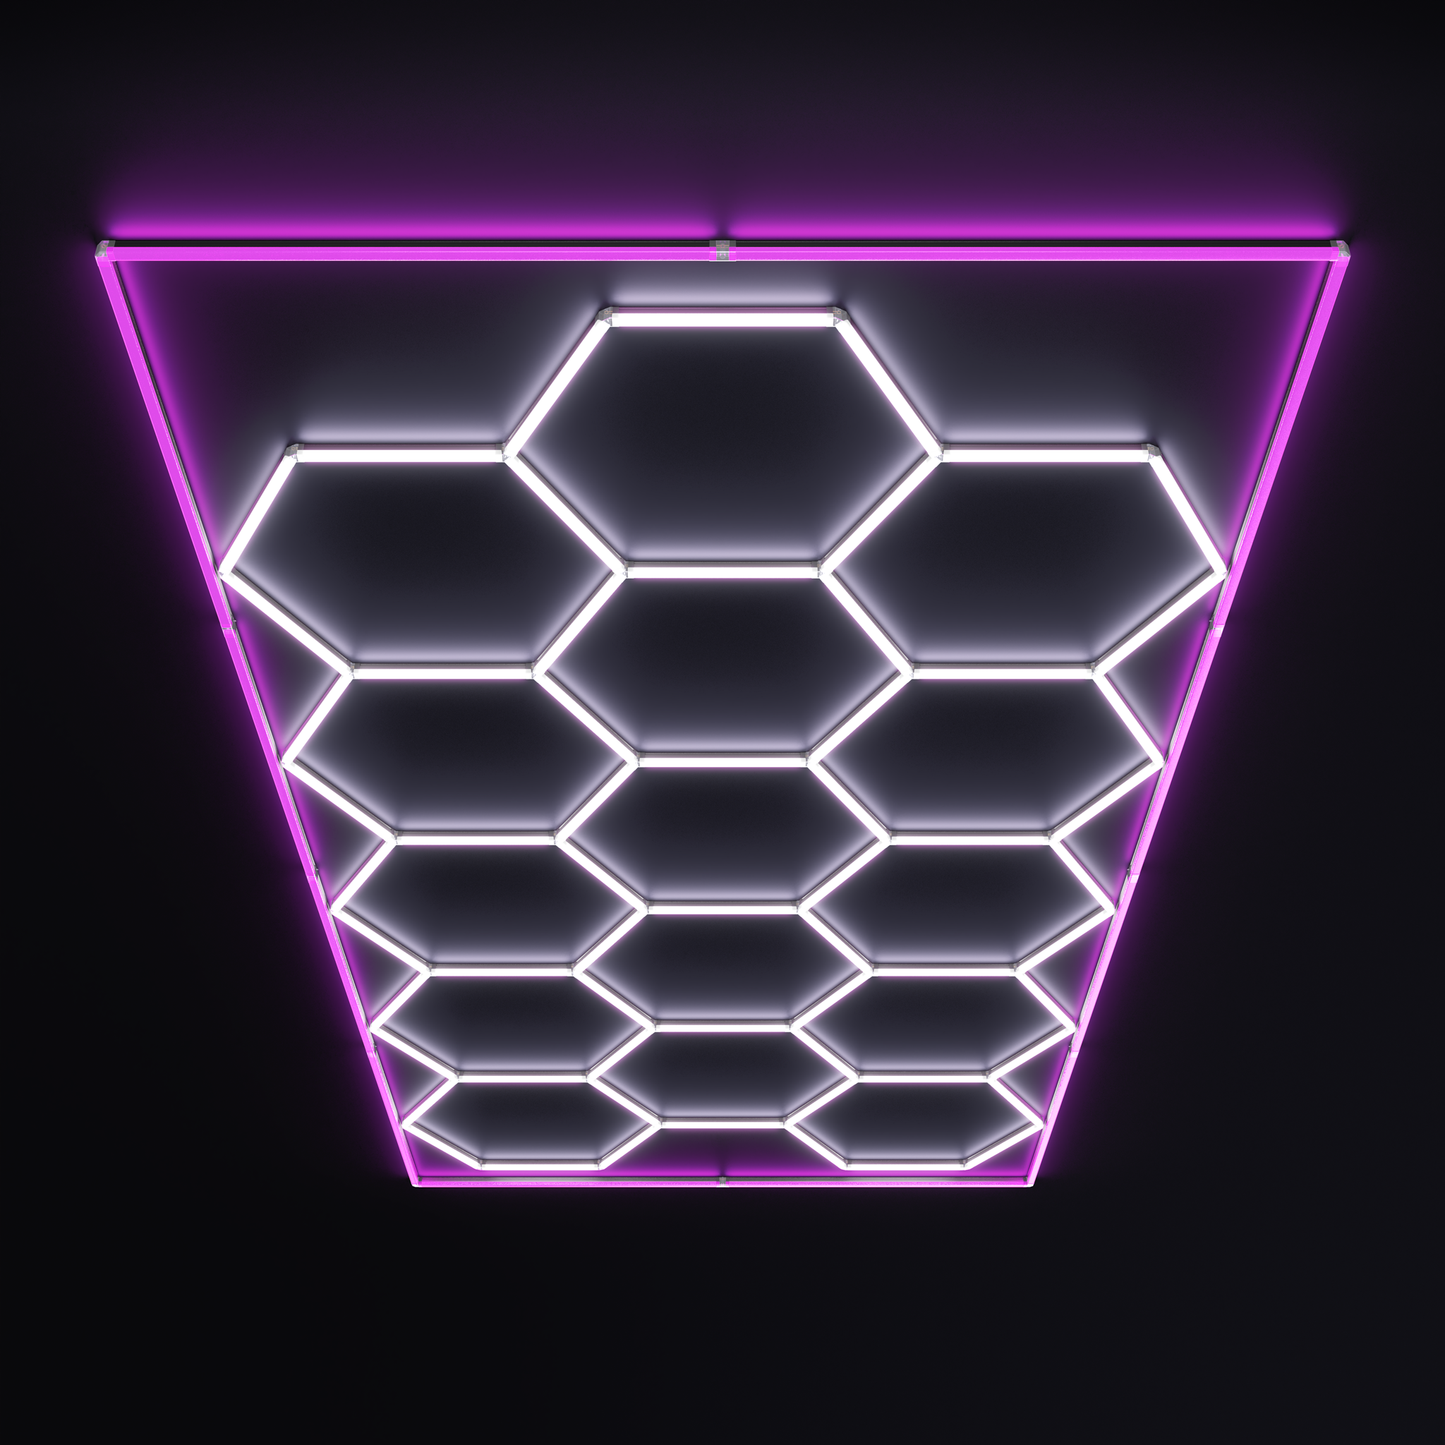 15 Hex Kit With Pink Border (16’ x 8’)